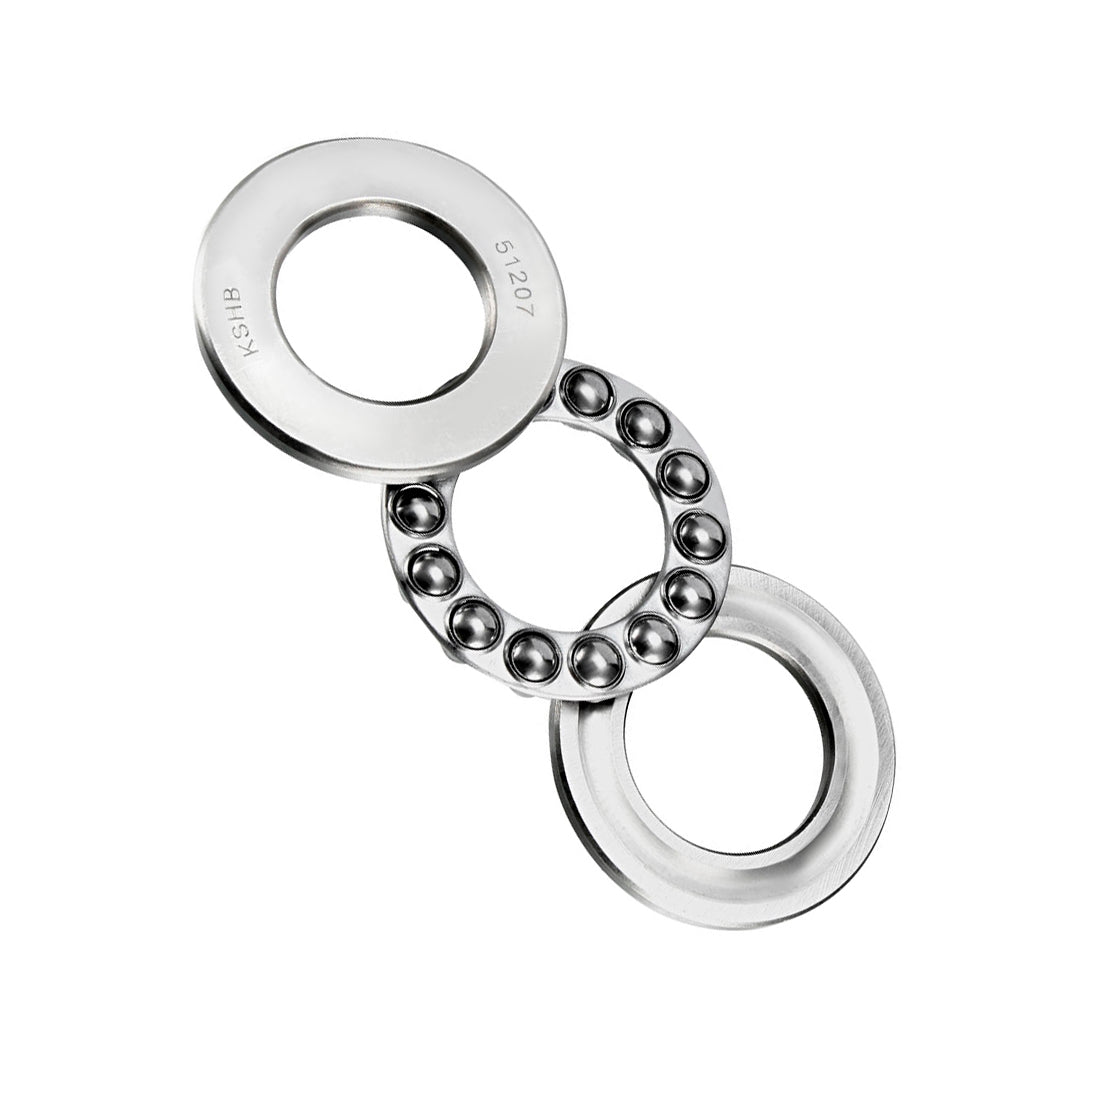 uxcell Uxcell 51207 Single Direction Thrust Ball Bearings 35mm x 62mm x 18mm Chrome Steel